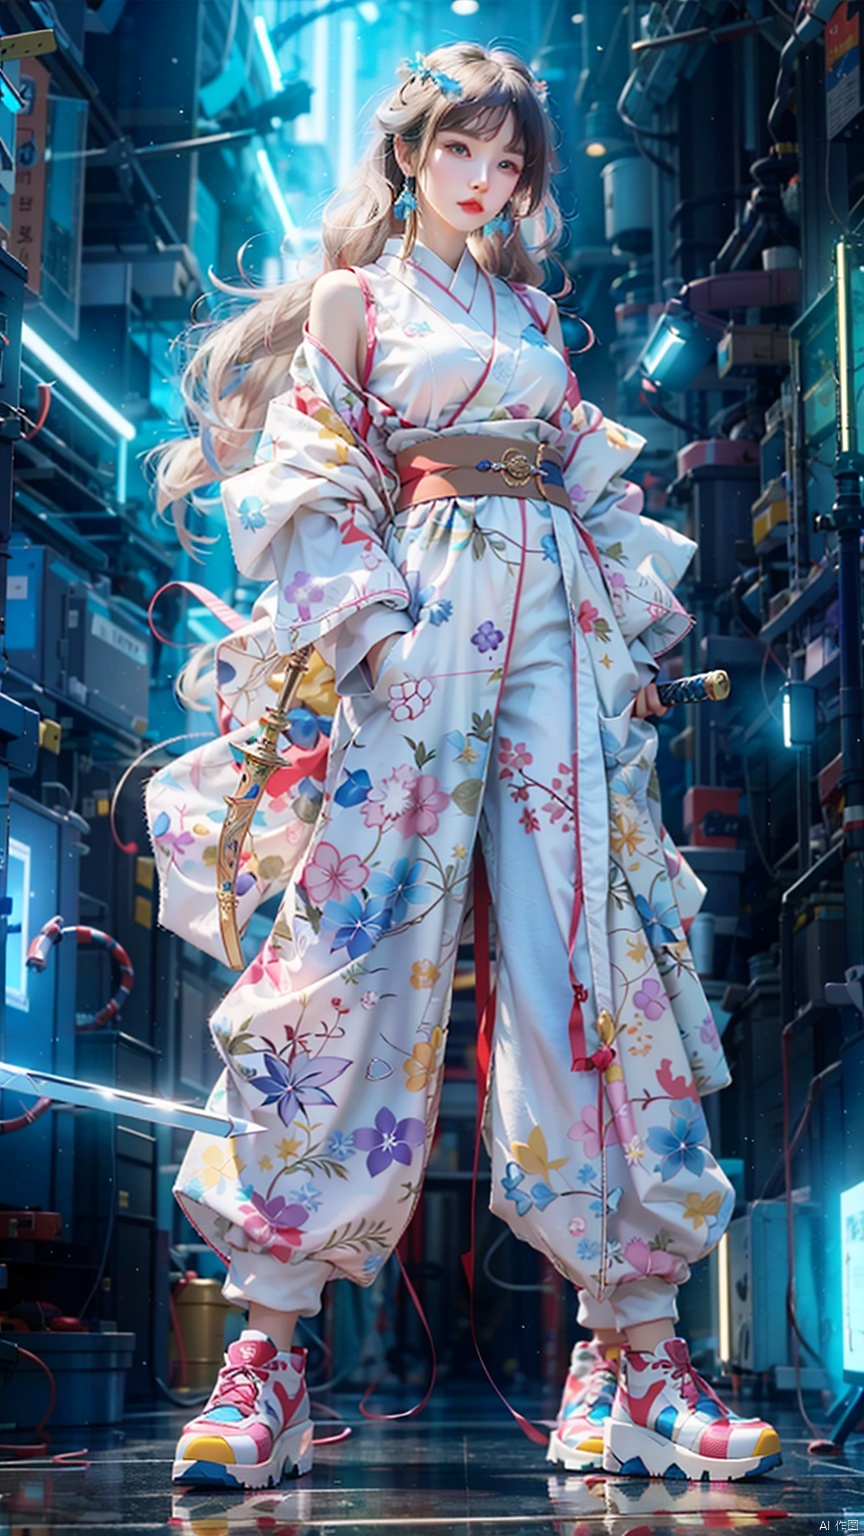 1 girl, holding a Japanese sword, not looking at the camera, three-dimensional facial features, Asian face, bangs, long hair, solo, blue eyes, holding, glow, robot, mecha, science fiction, open_ Hand, movie lighting, strong contrast, high level of detail, best quality, masterpiece, spirit, crystal_ Dress, crystal, with white, blue, and silver as the main color tones Kimono, Hanfu, clouds, with a background of an Eastern dragon (with high-precision details)., long, Chinese style, sdmai